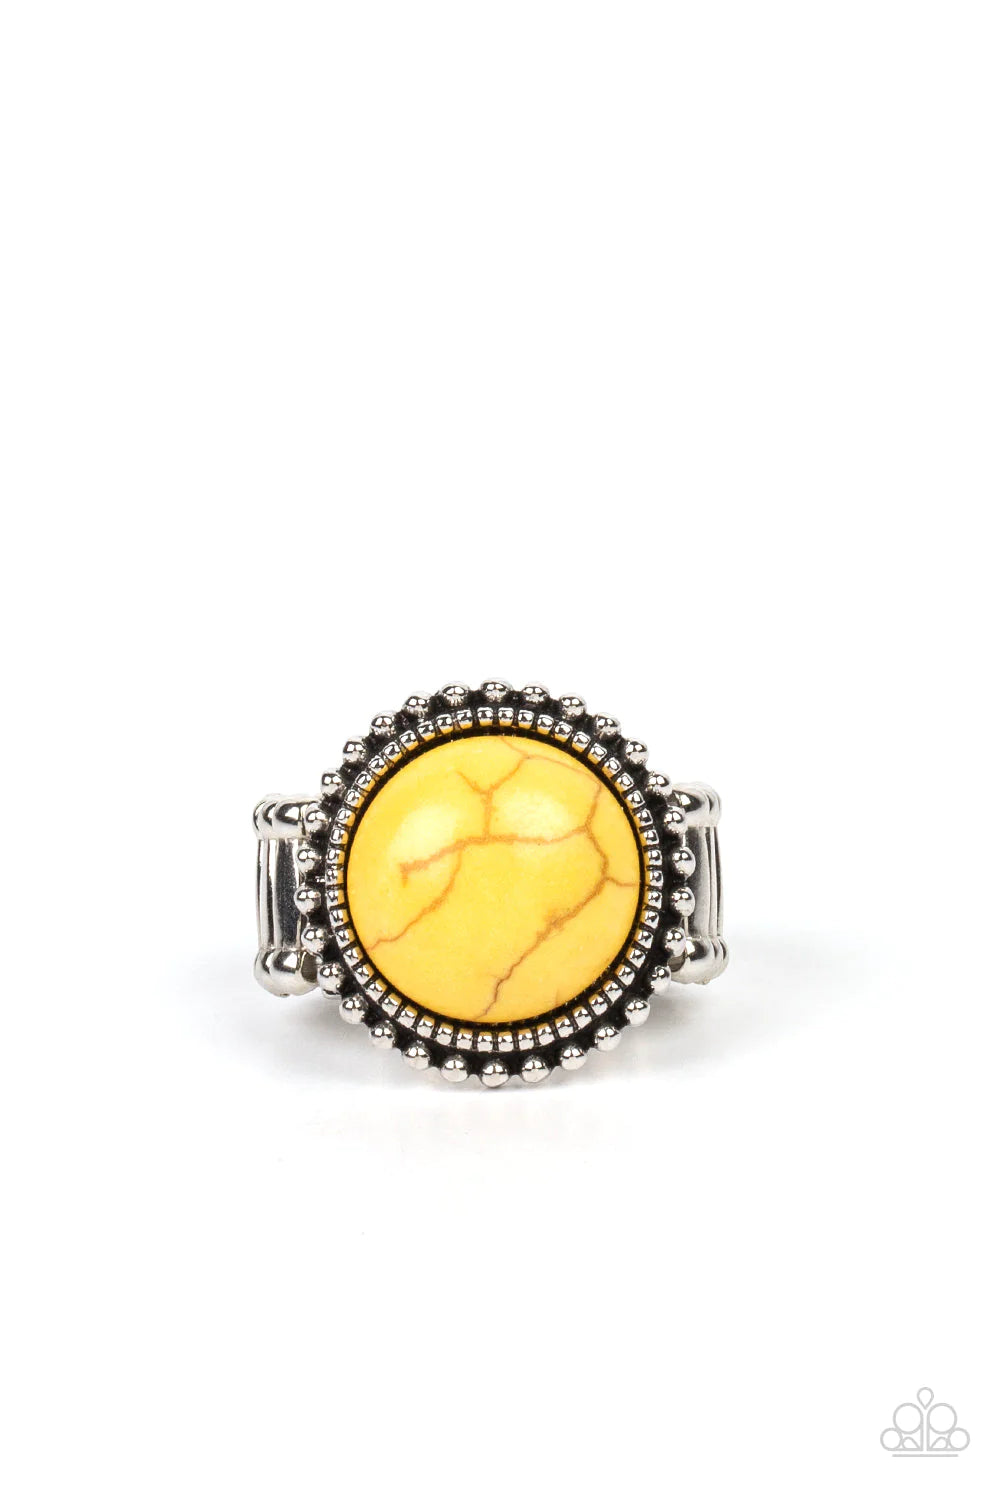 Paparazzi Accessories Messa Mecca - Yellow A round Daffodil stone bursts from a dainty border of textured silver. An outer ring of rustic silver studs radiates around the design, adding an authentic flair to the artisan-inspired centerpiece. Features a st